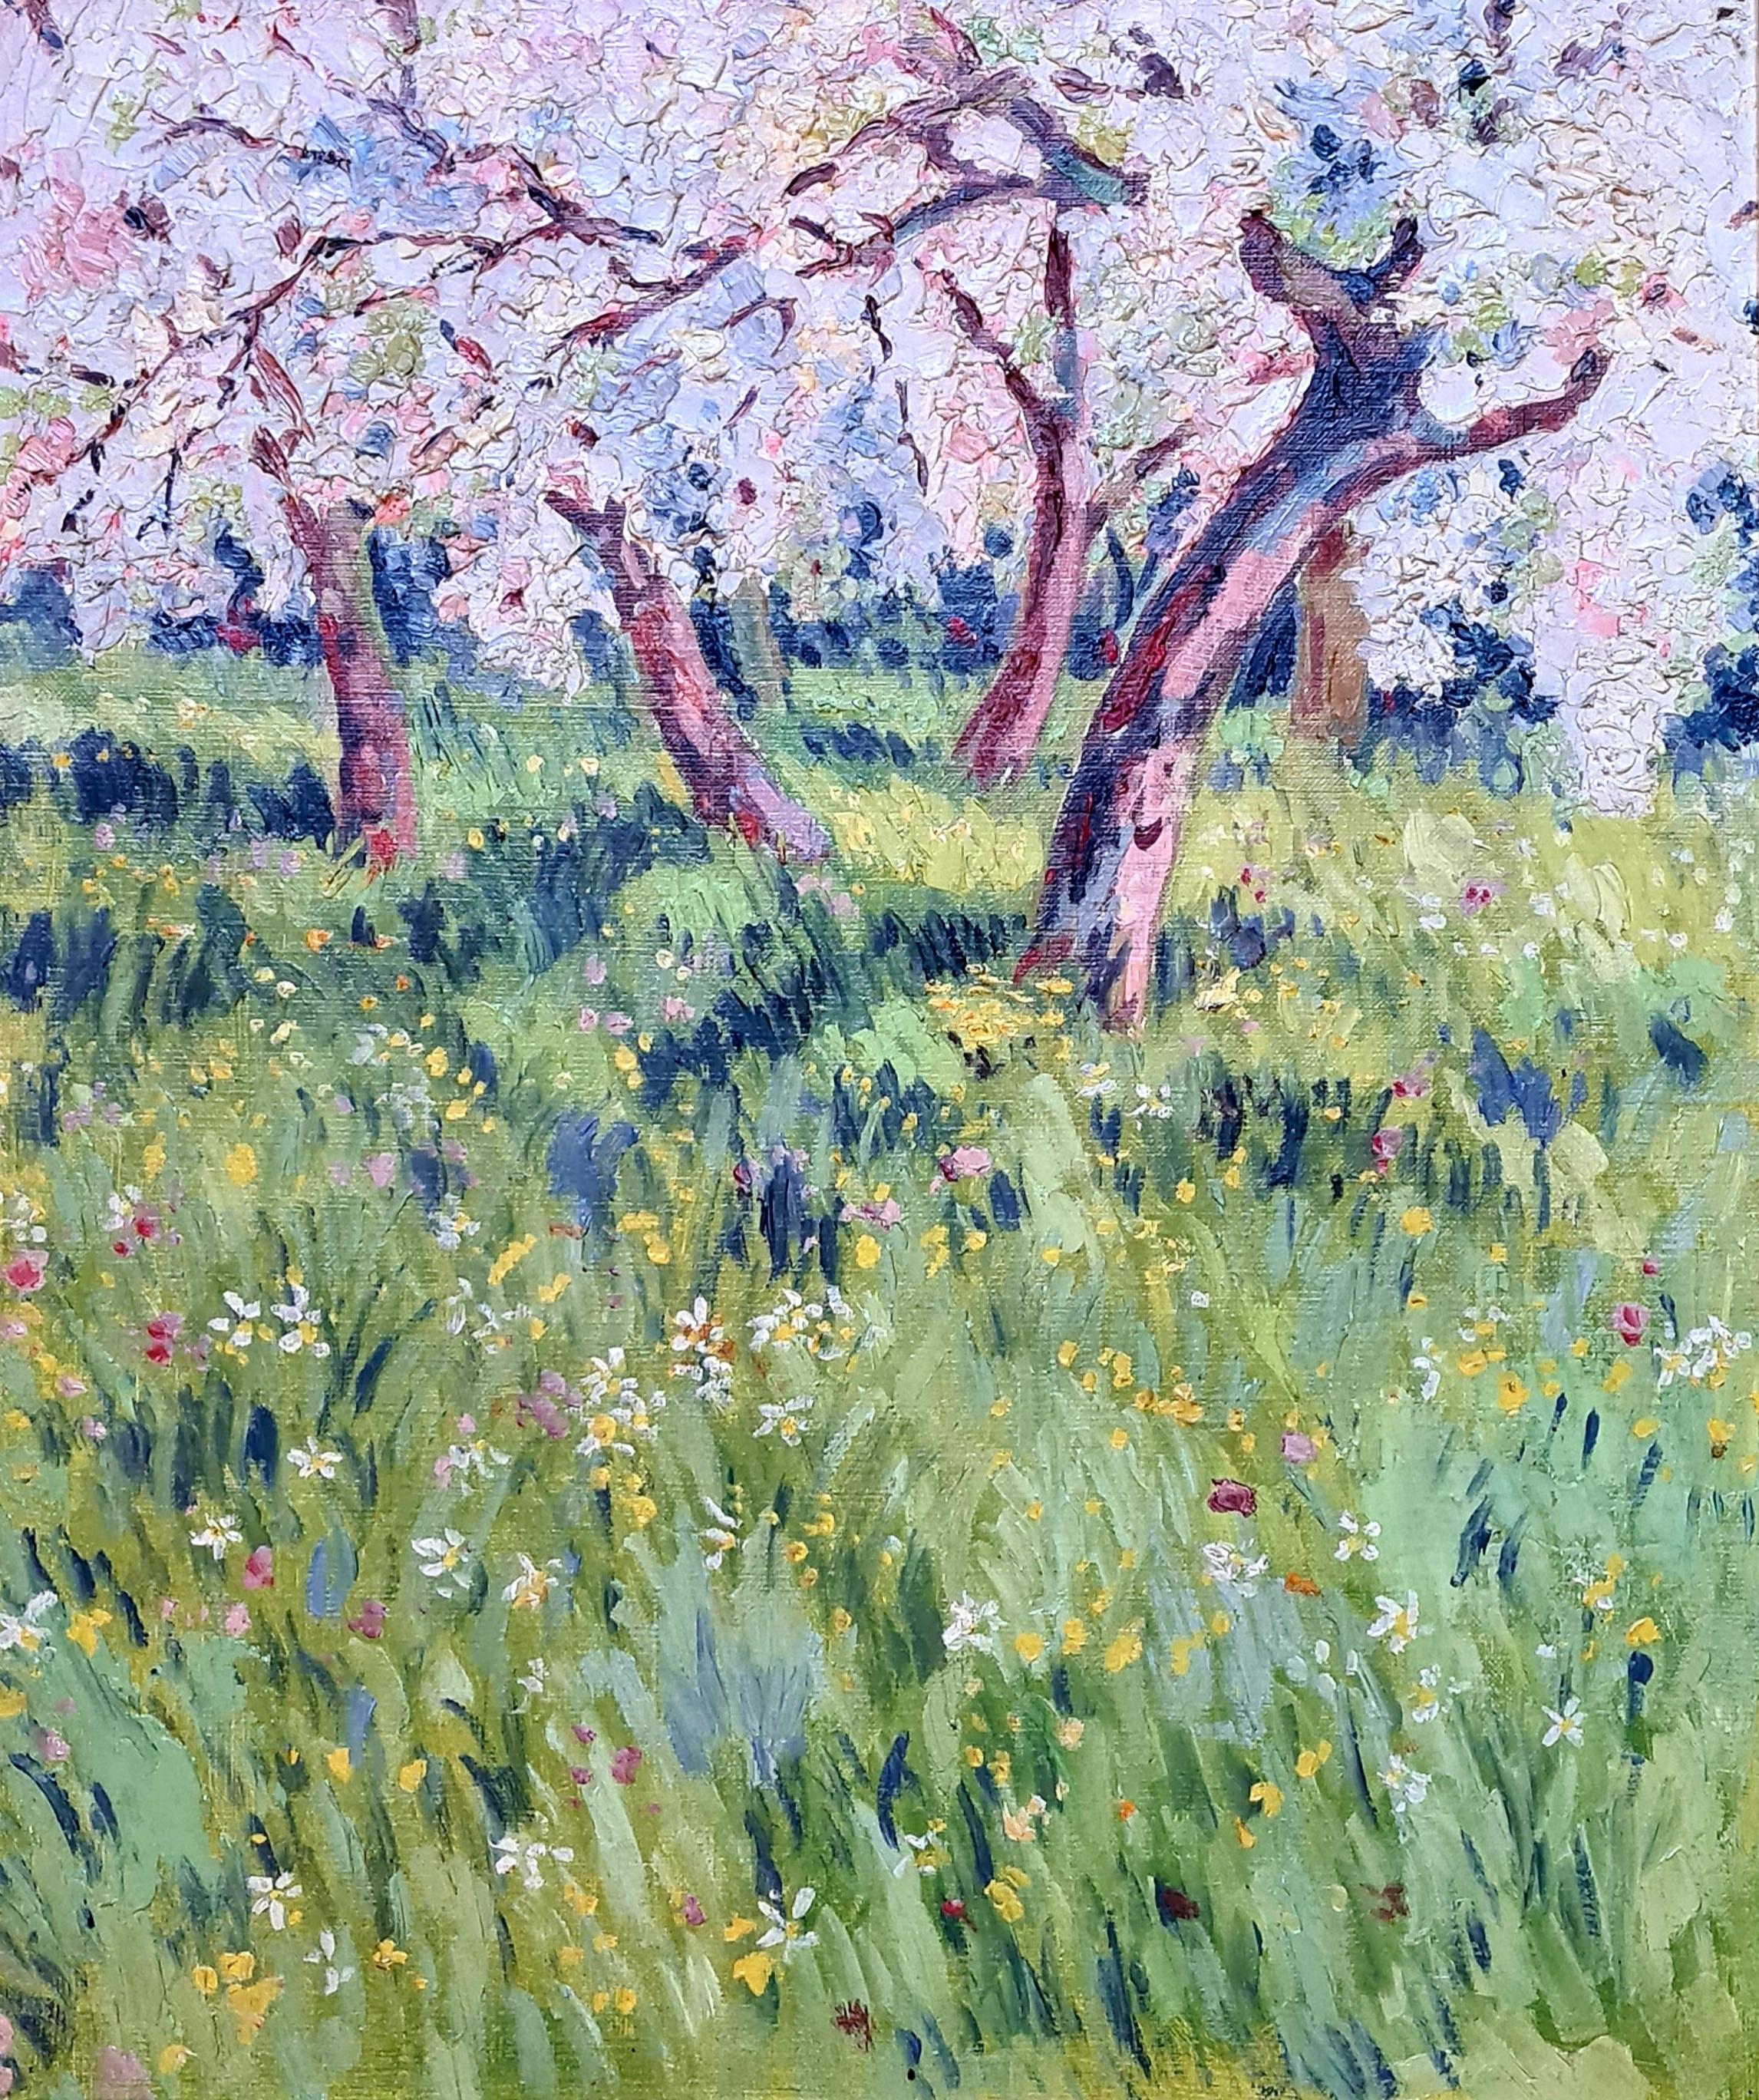 Apple Trees in Blossom at Giverny, French Impressionist Spring Landscape. - Painting by Claude Monet